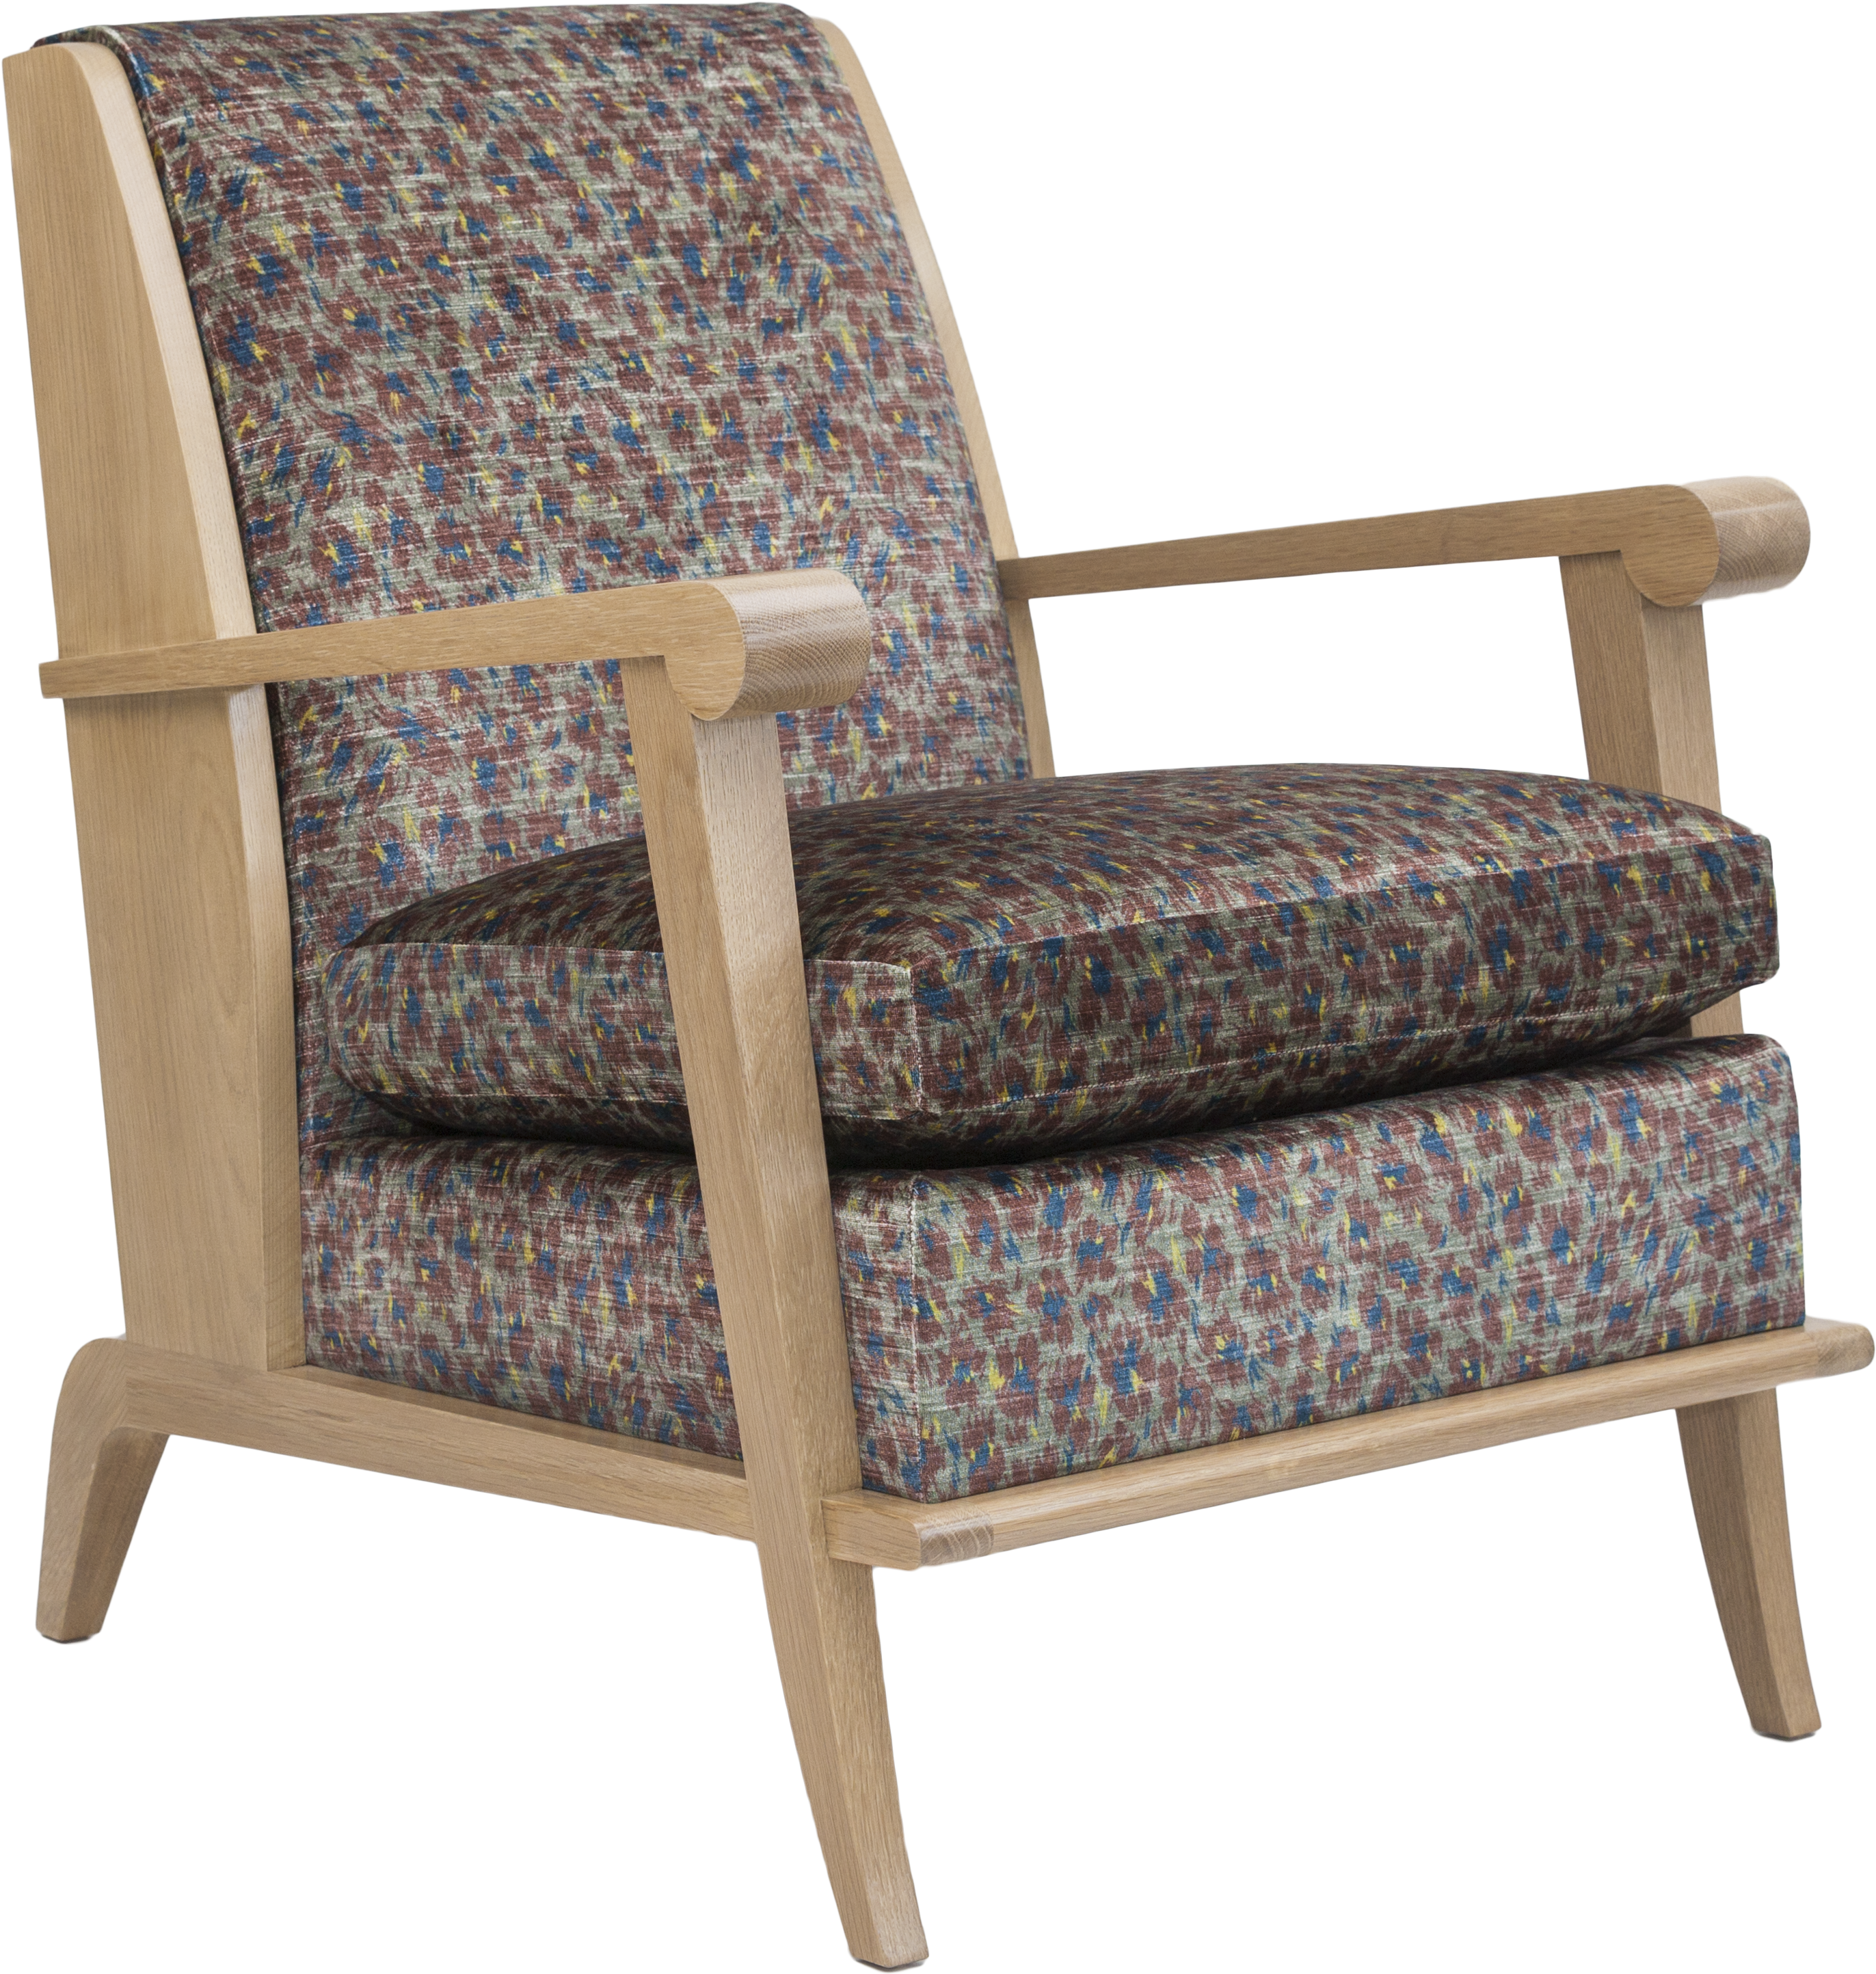 Modern Wooden Club Chairwith Patterned Upholstery